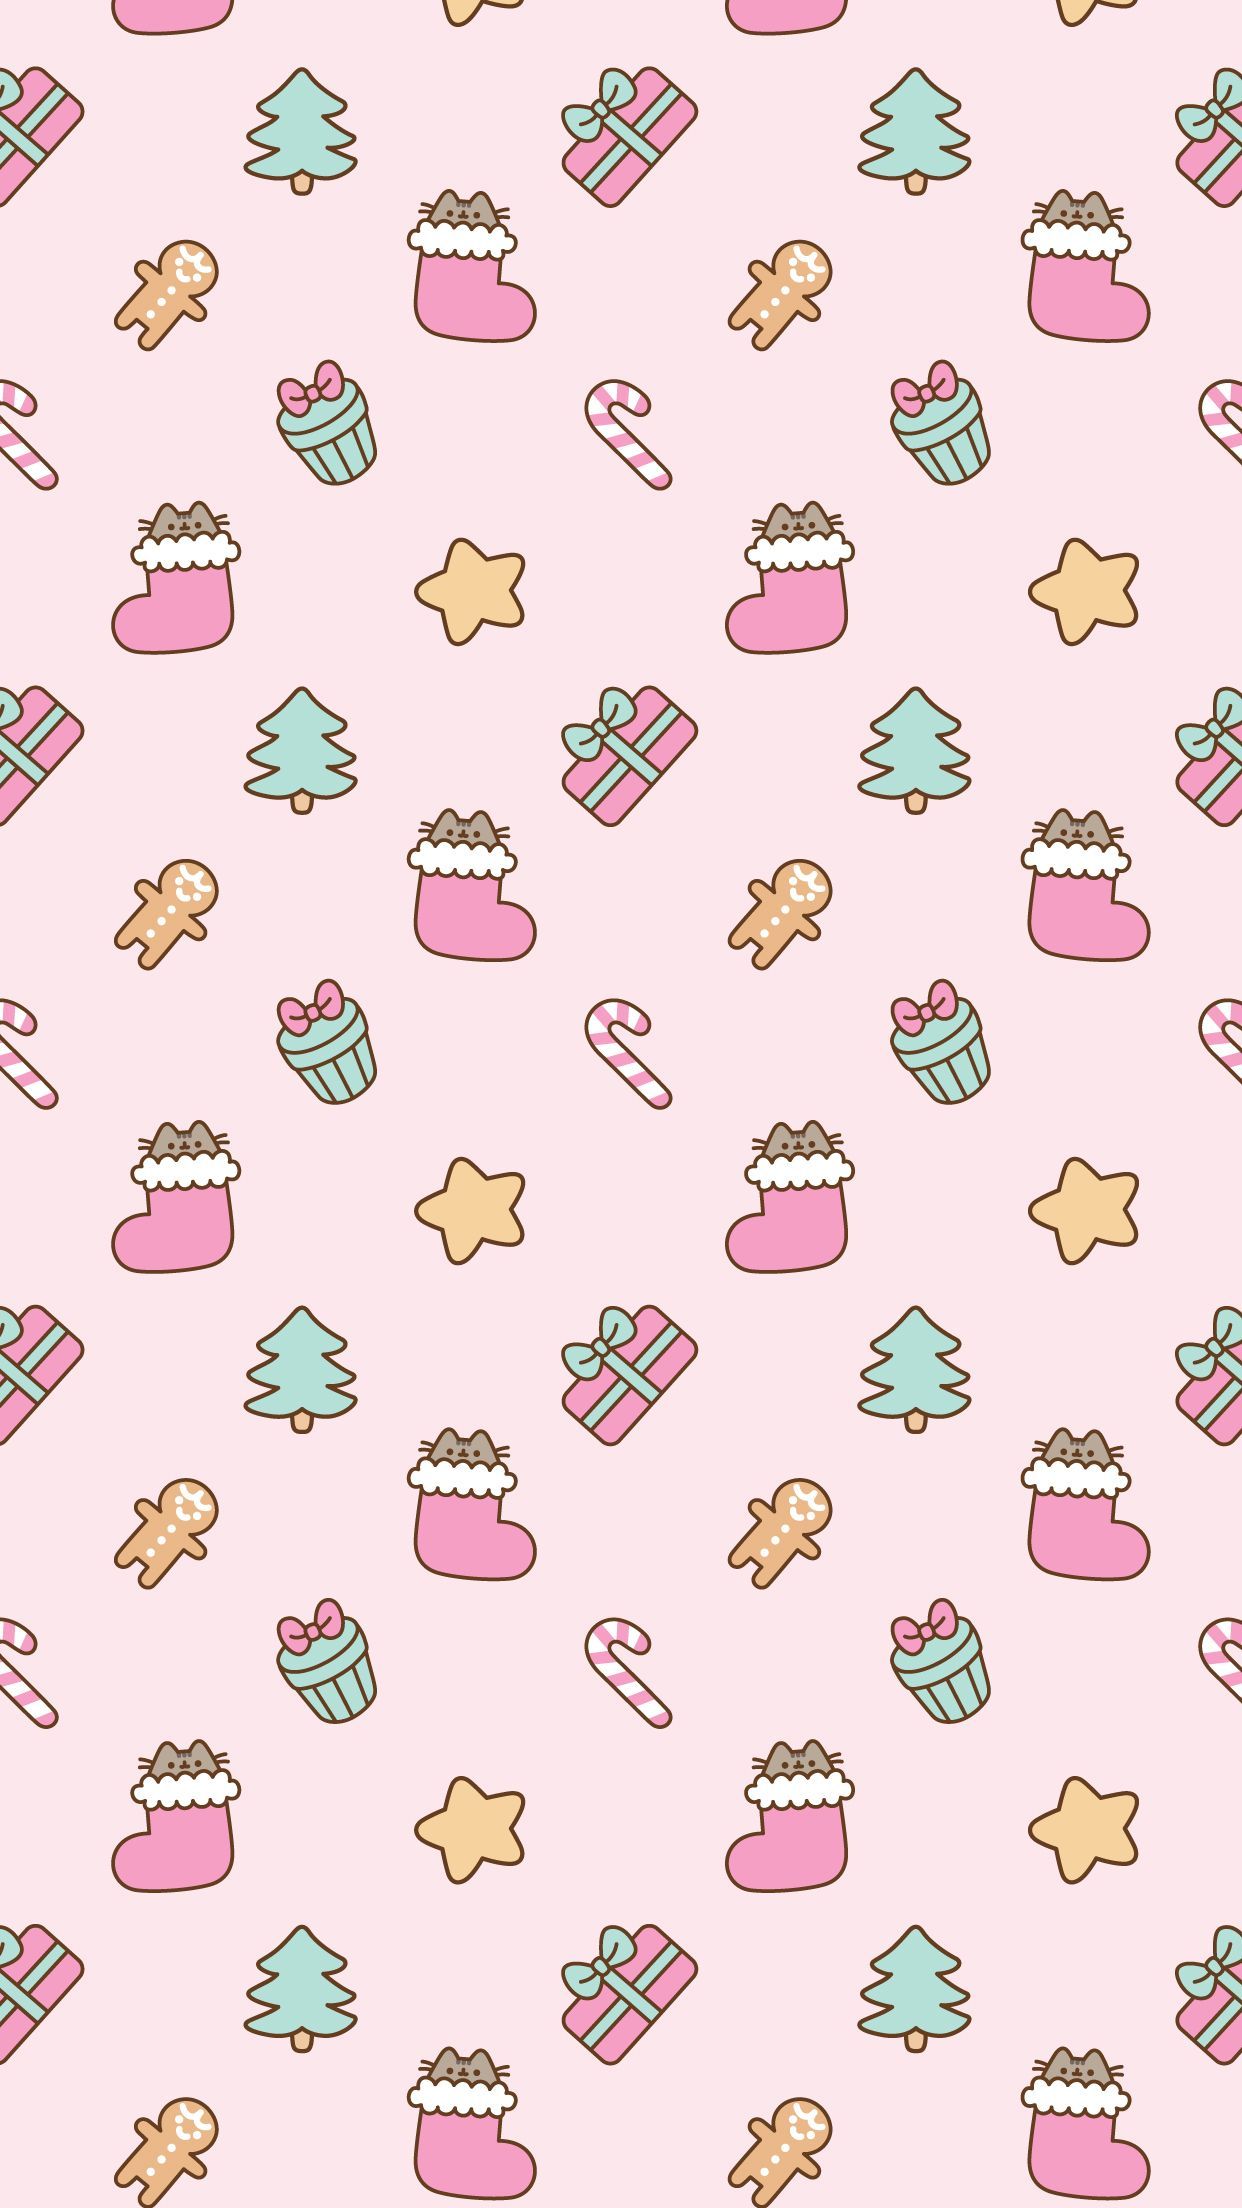 Free Christmas Pusheen Android and iPhone® Wallpaper - #ClairesBlog. Wallpaper iphone christmas, Cute christmas wallpaper, Christmas phone wallpaper